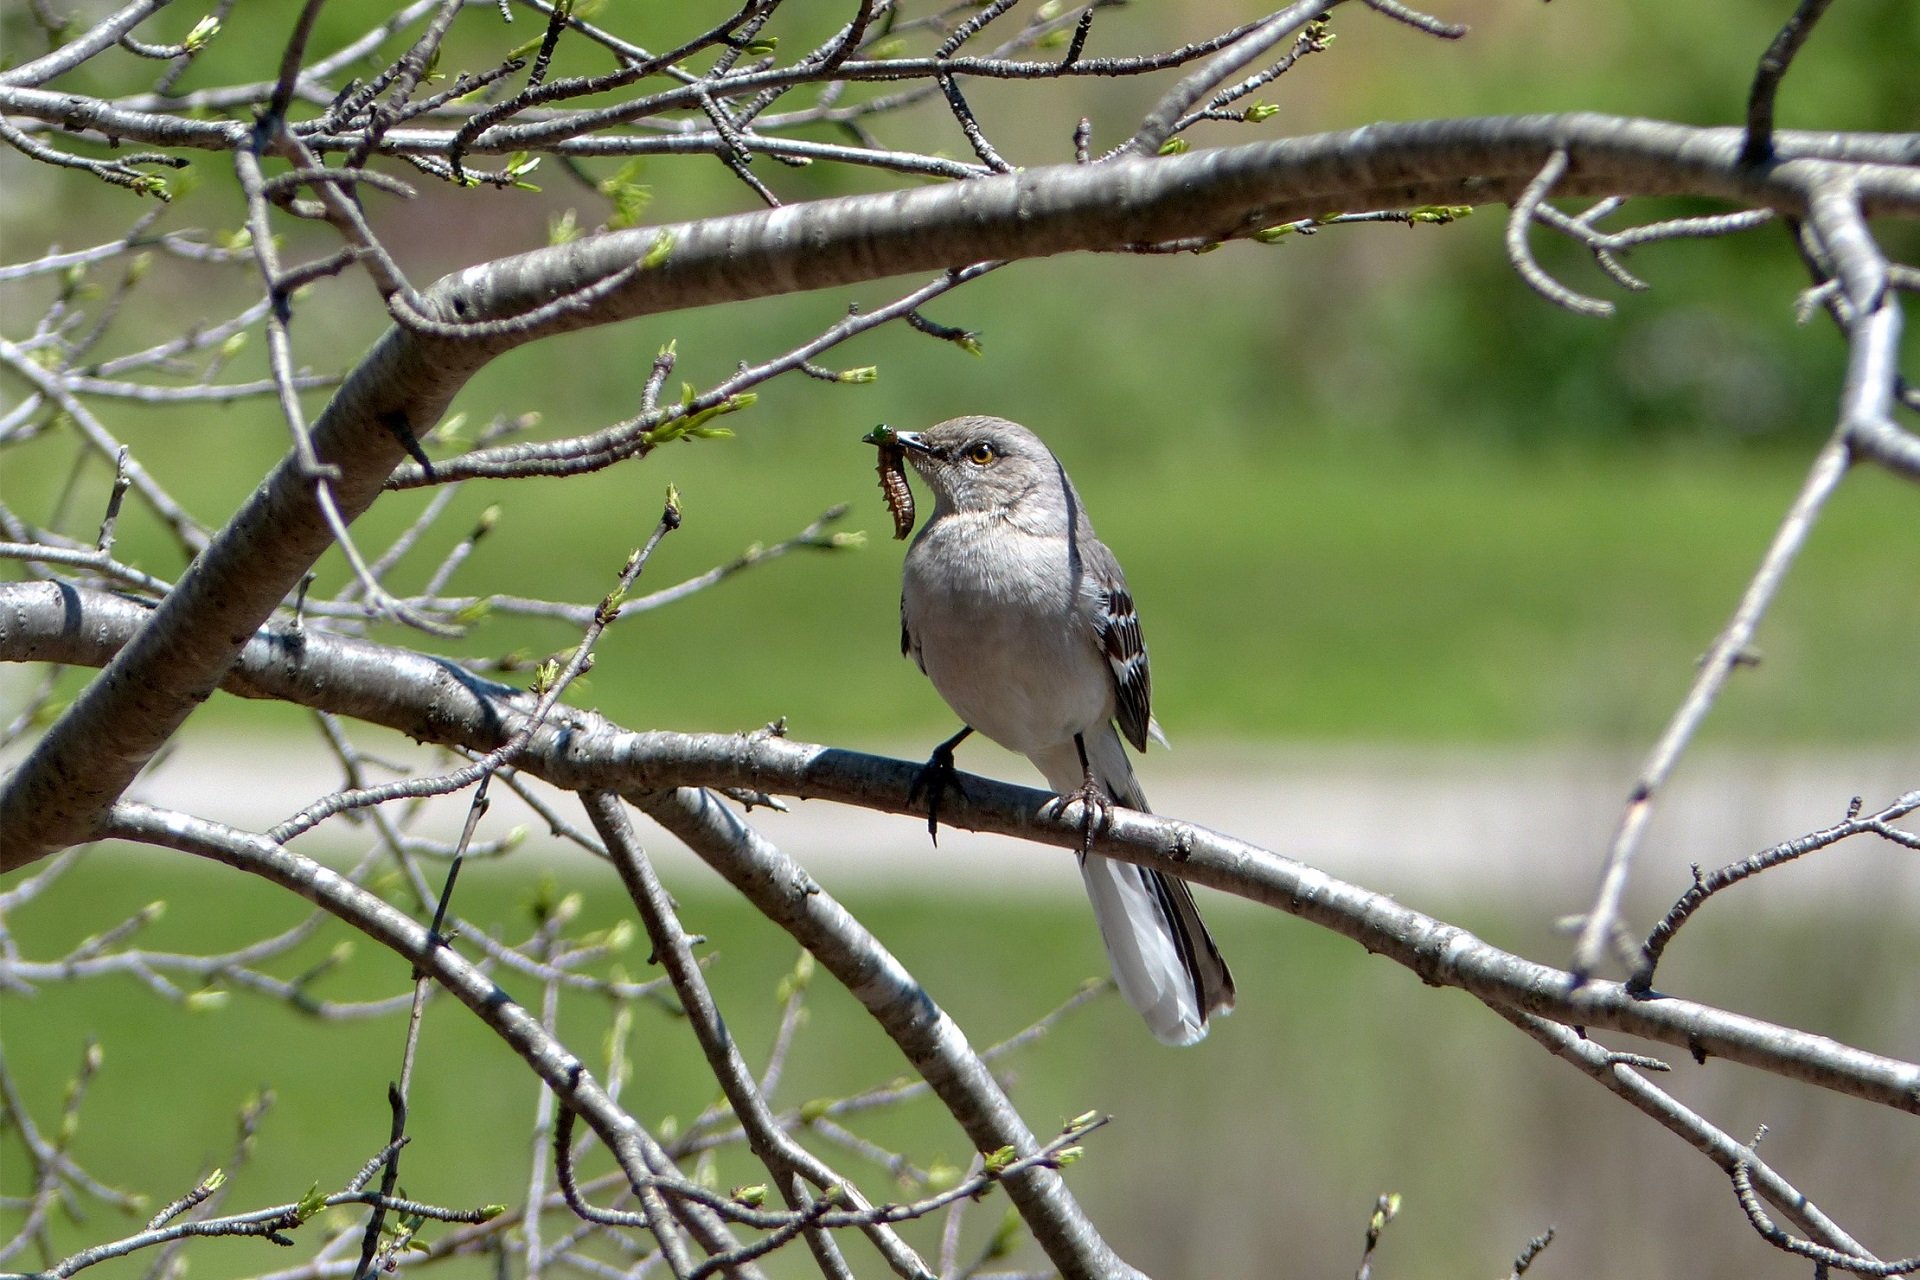 A Northern Mockingbird perches on a budding tree. It holds an insect in its beak.